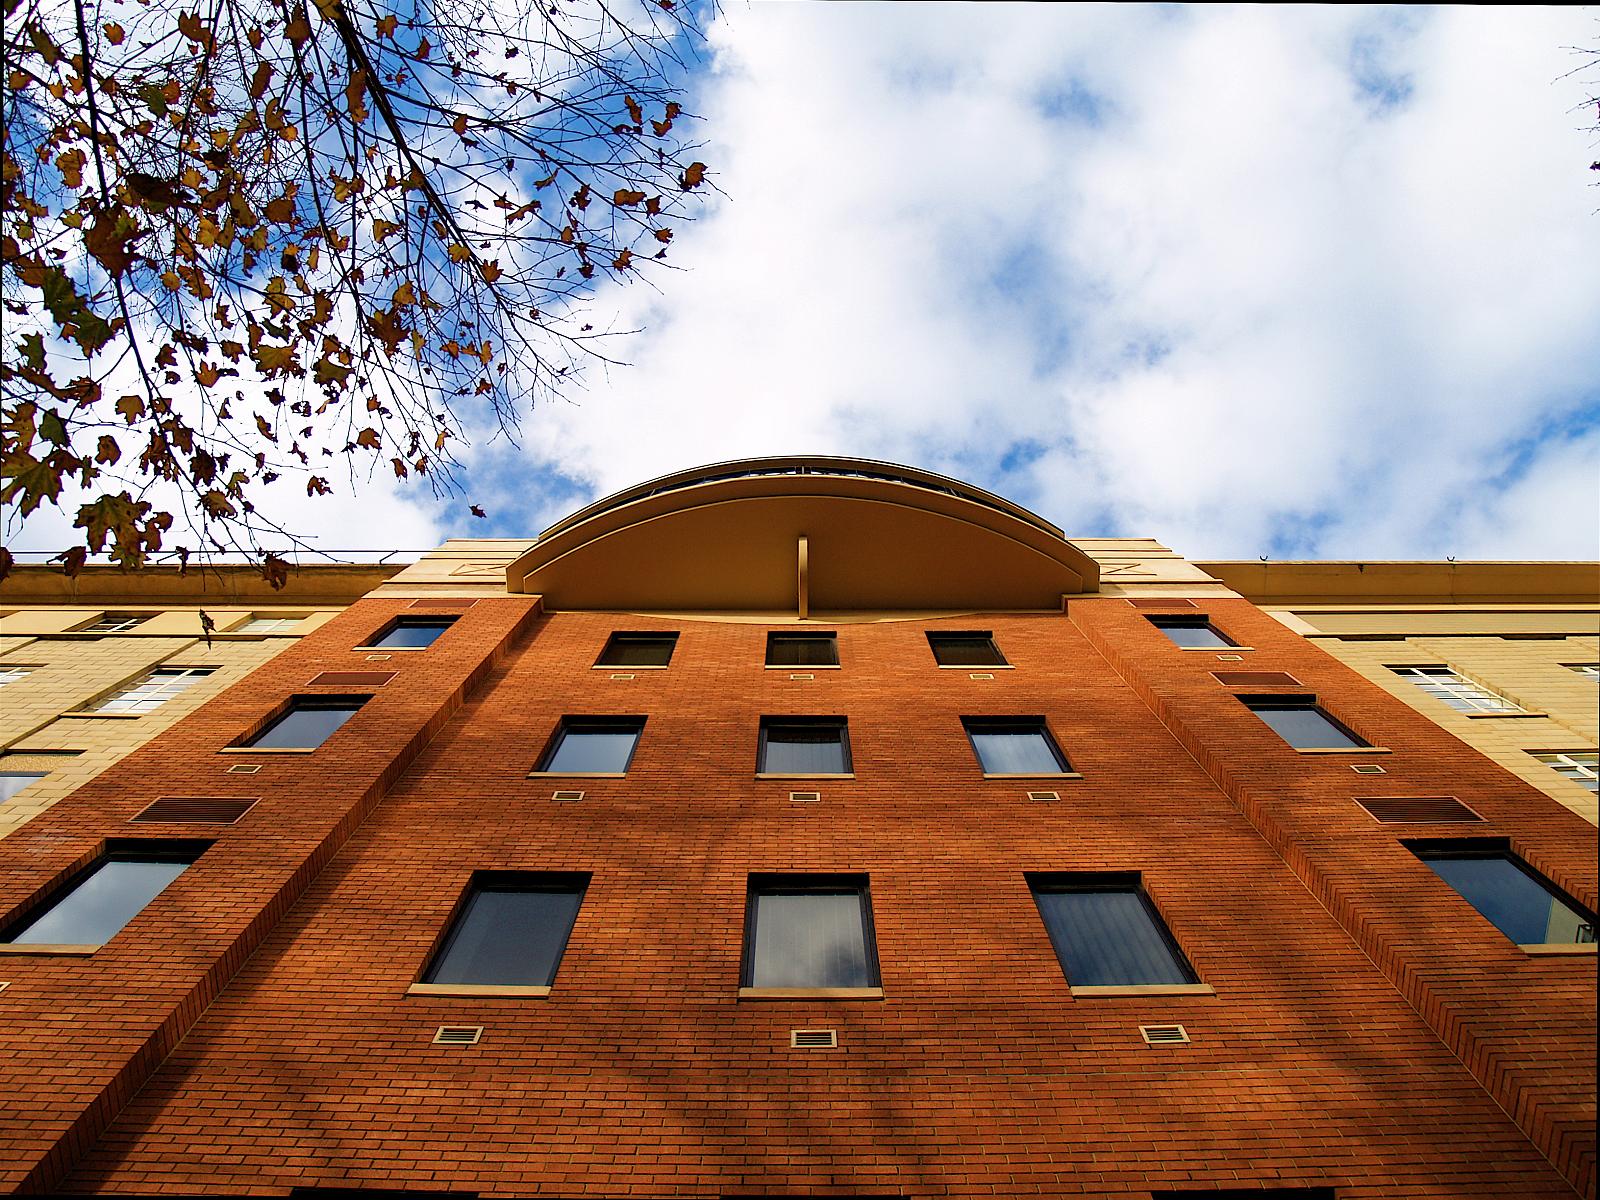 a tall brick building with a white roof under a cloudy blue sky